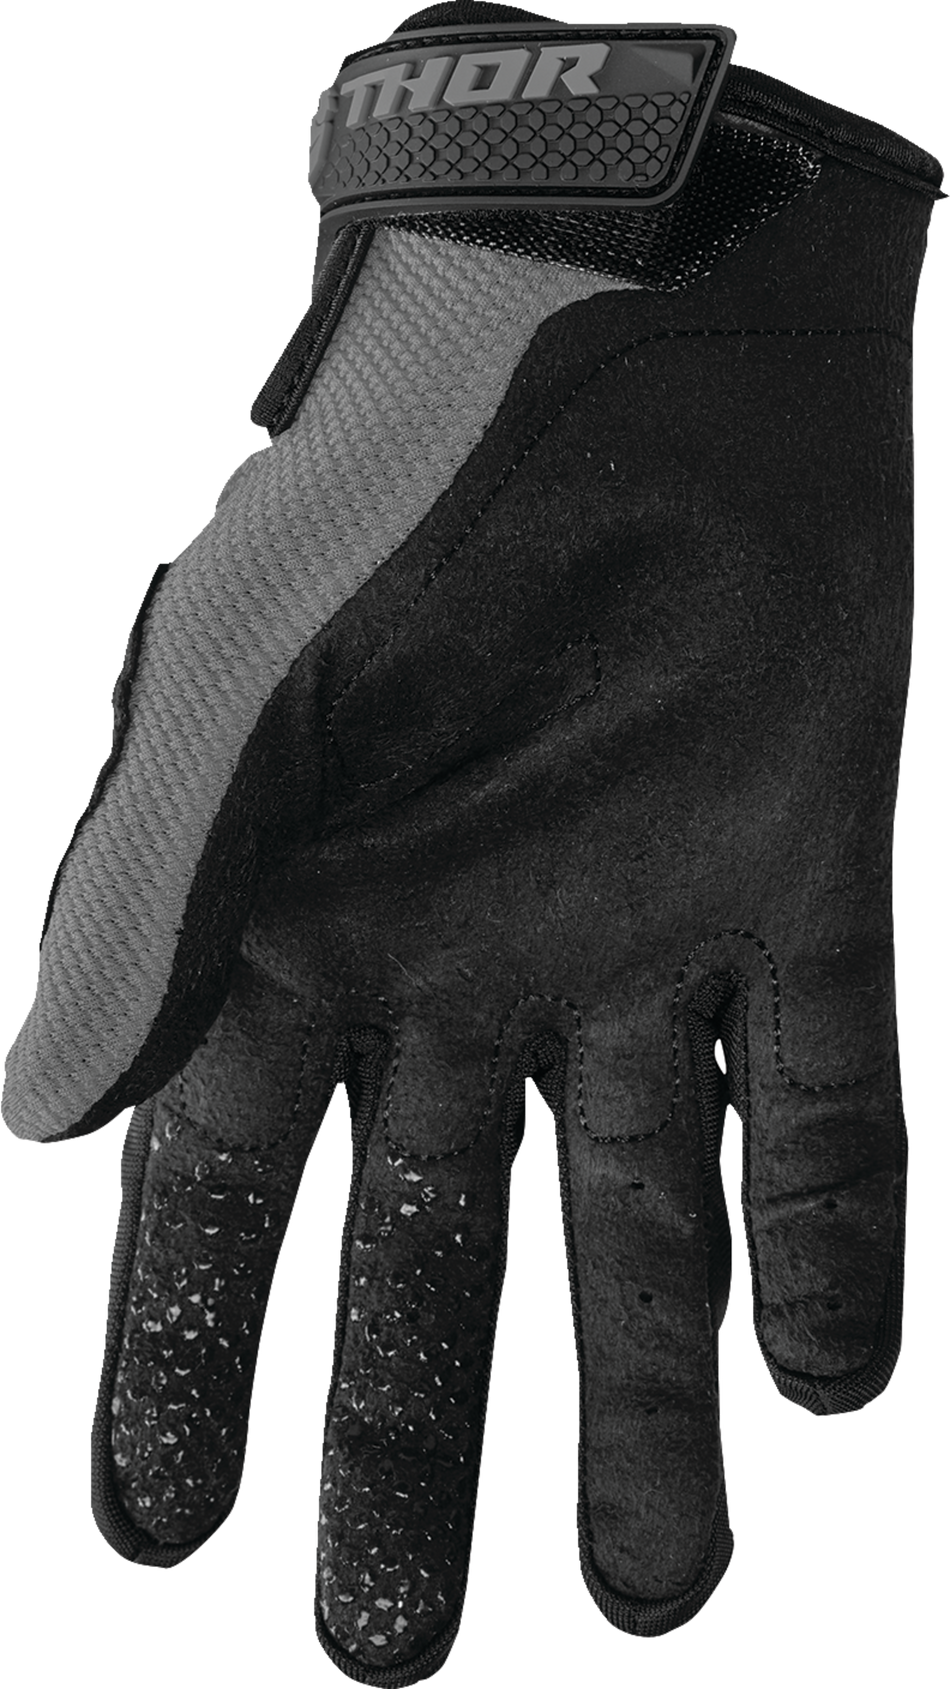 THOR Sector Gloves - Gray/White - Small 3330-7274